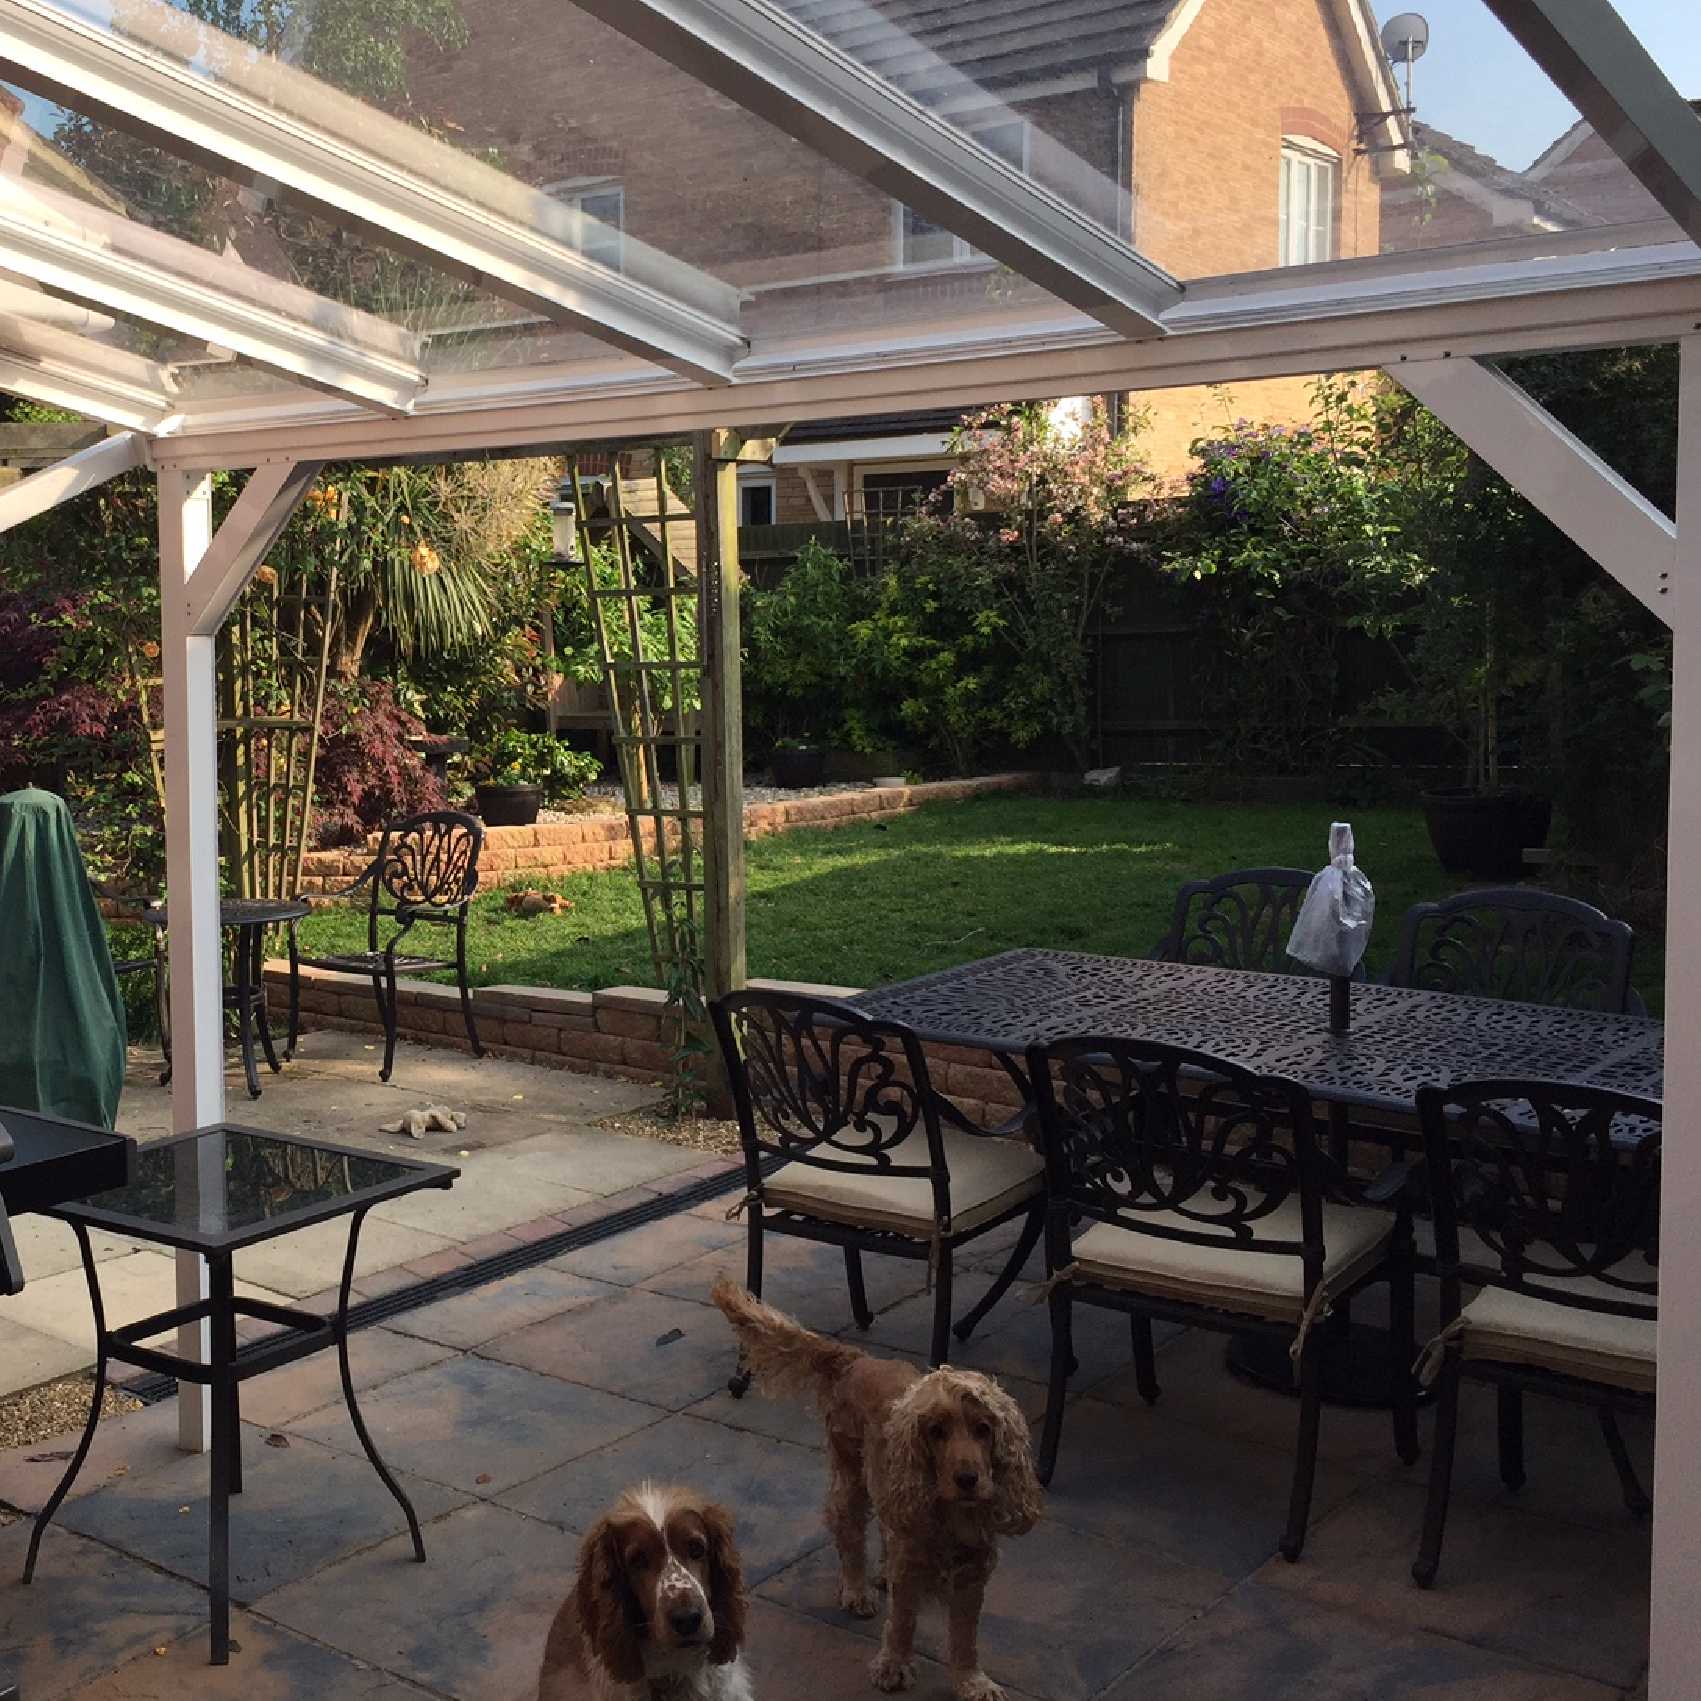 Affordable Omega Smart Lean-To Canopy, White UNGLAZED for 6mm Glazing - 7.0m (W) x 1.5m (P), (4) Supporting Posts